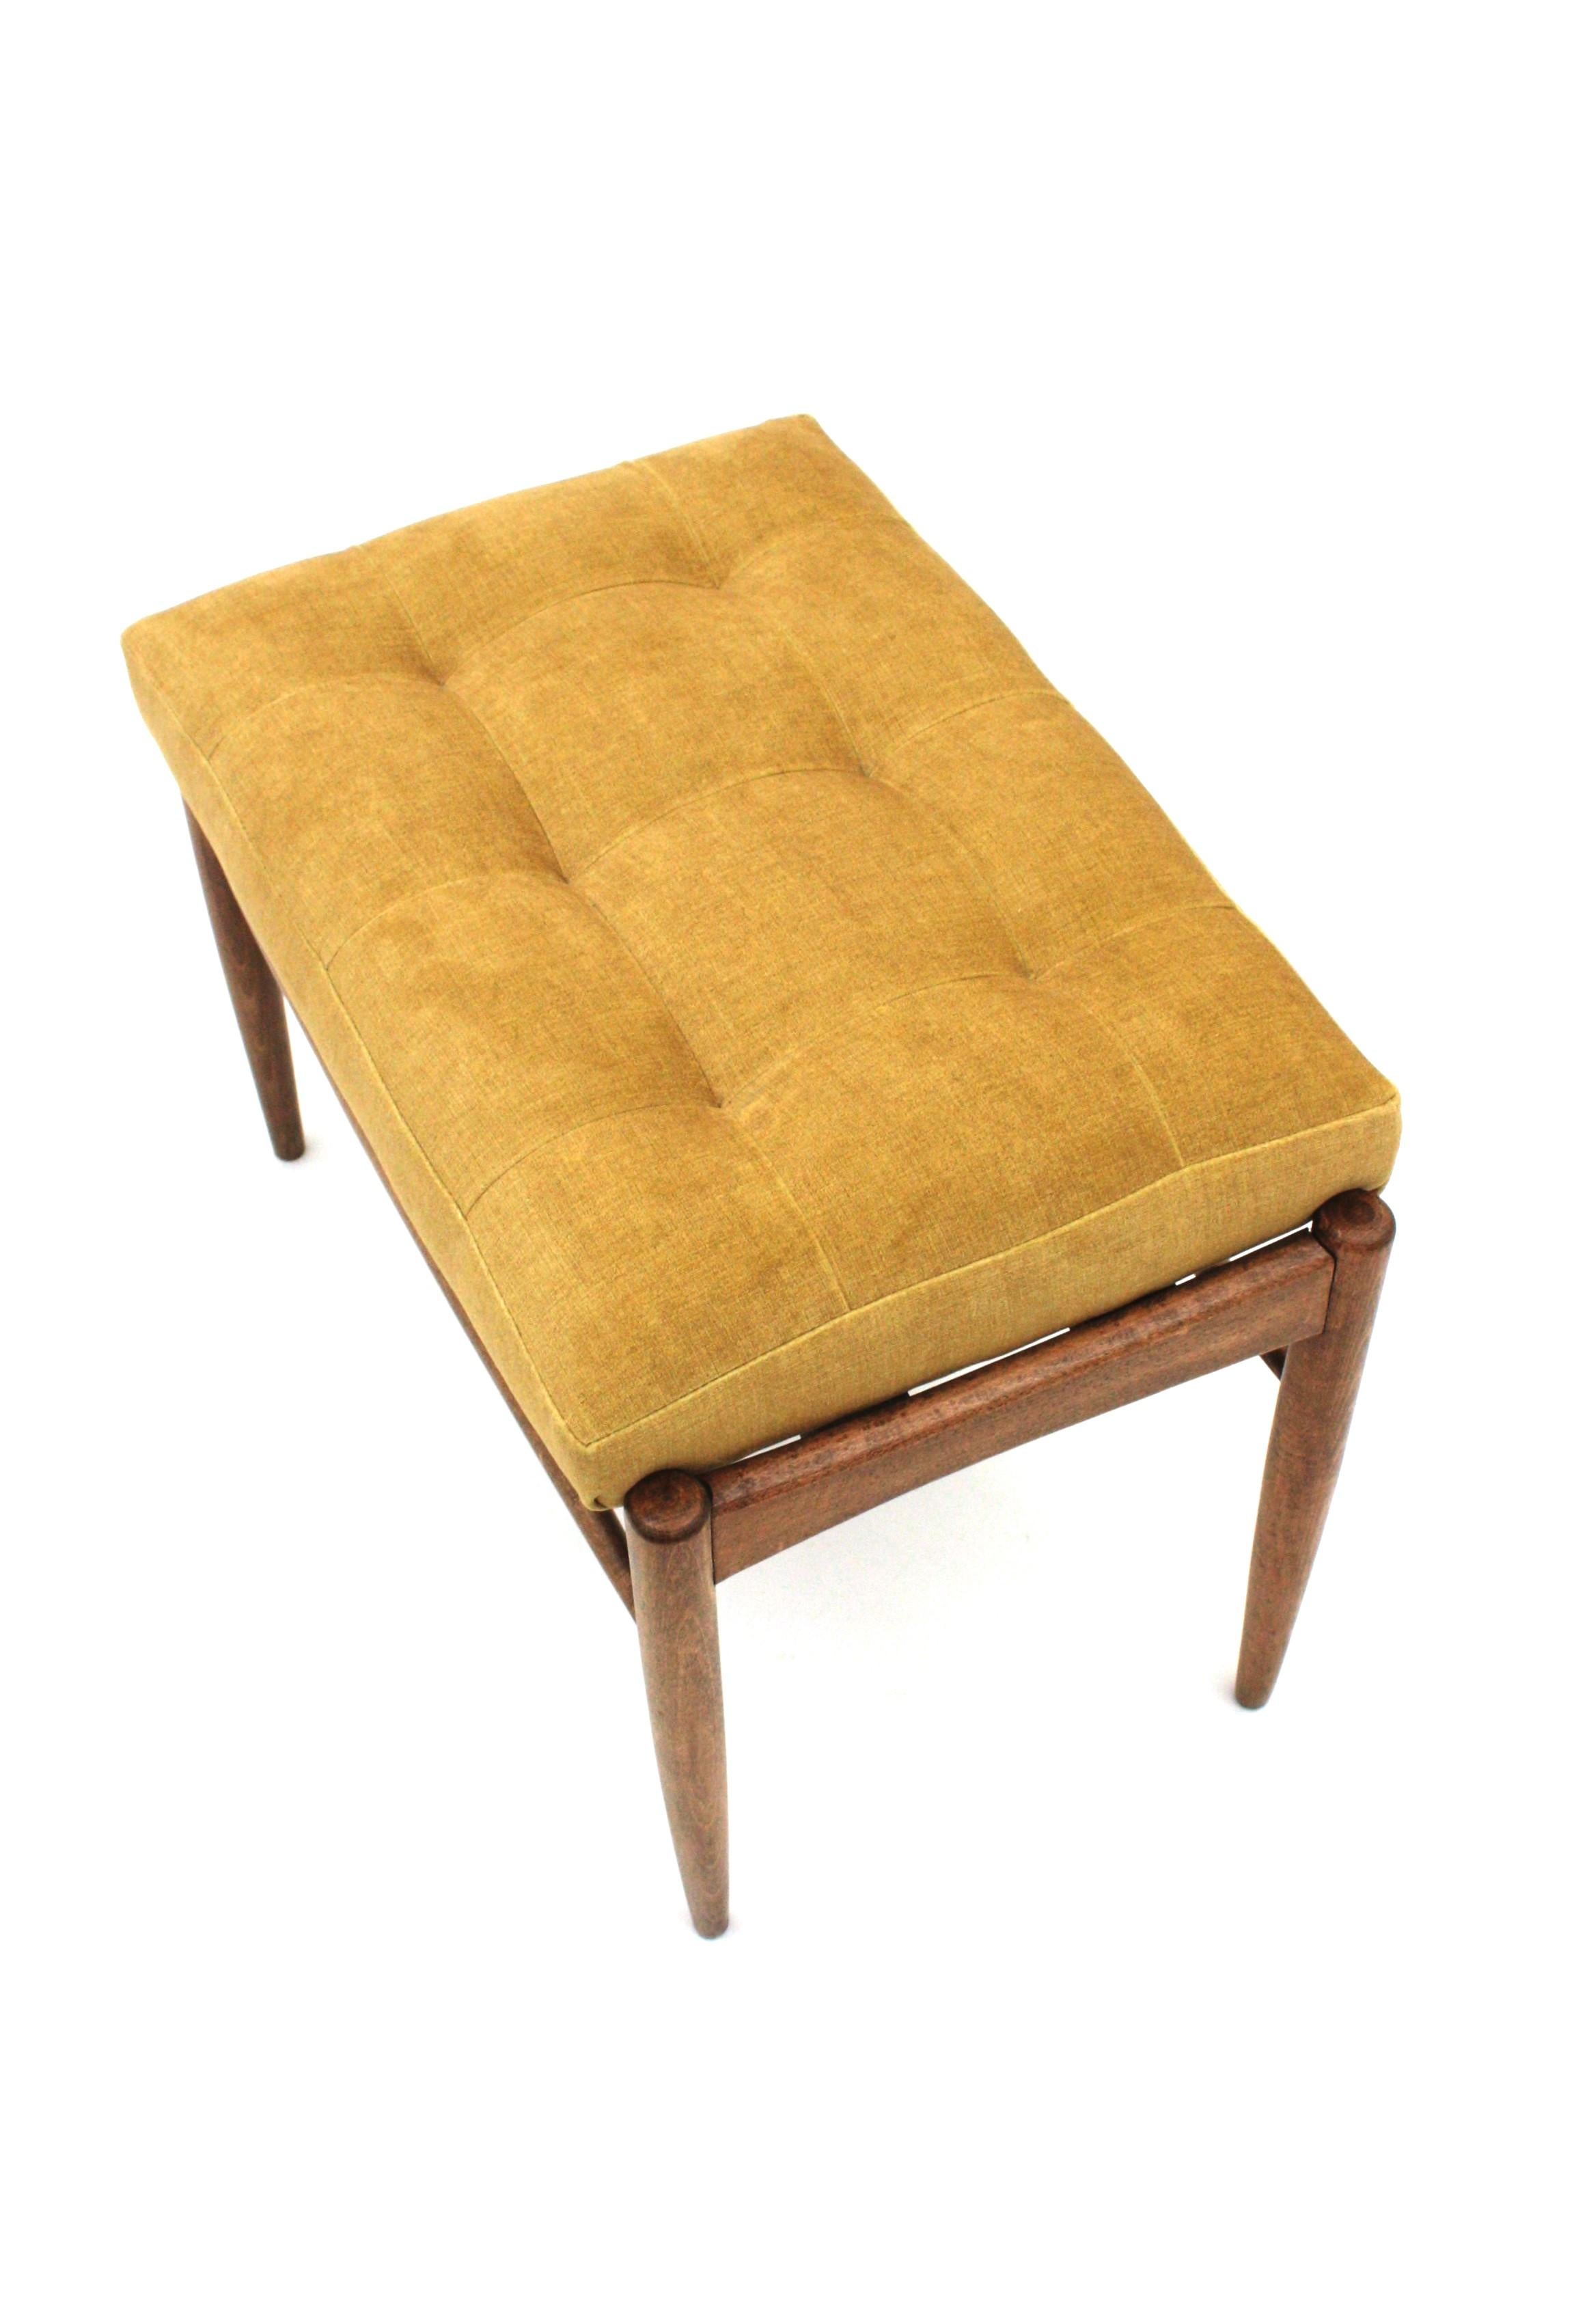 Scandinavian Modern Stool Ottoman or Bench New Upholstered in Yellow Chenille For Sale 3